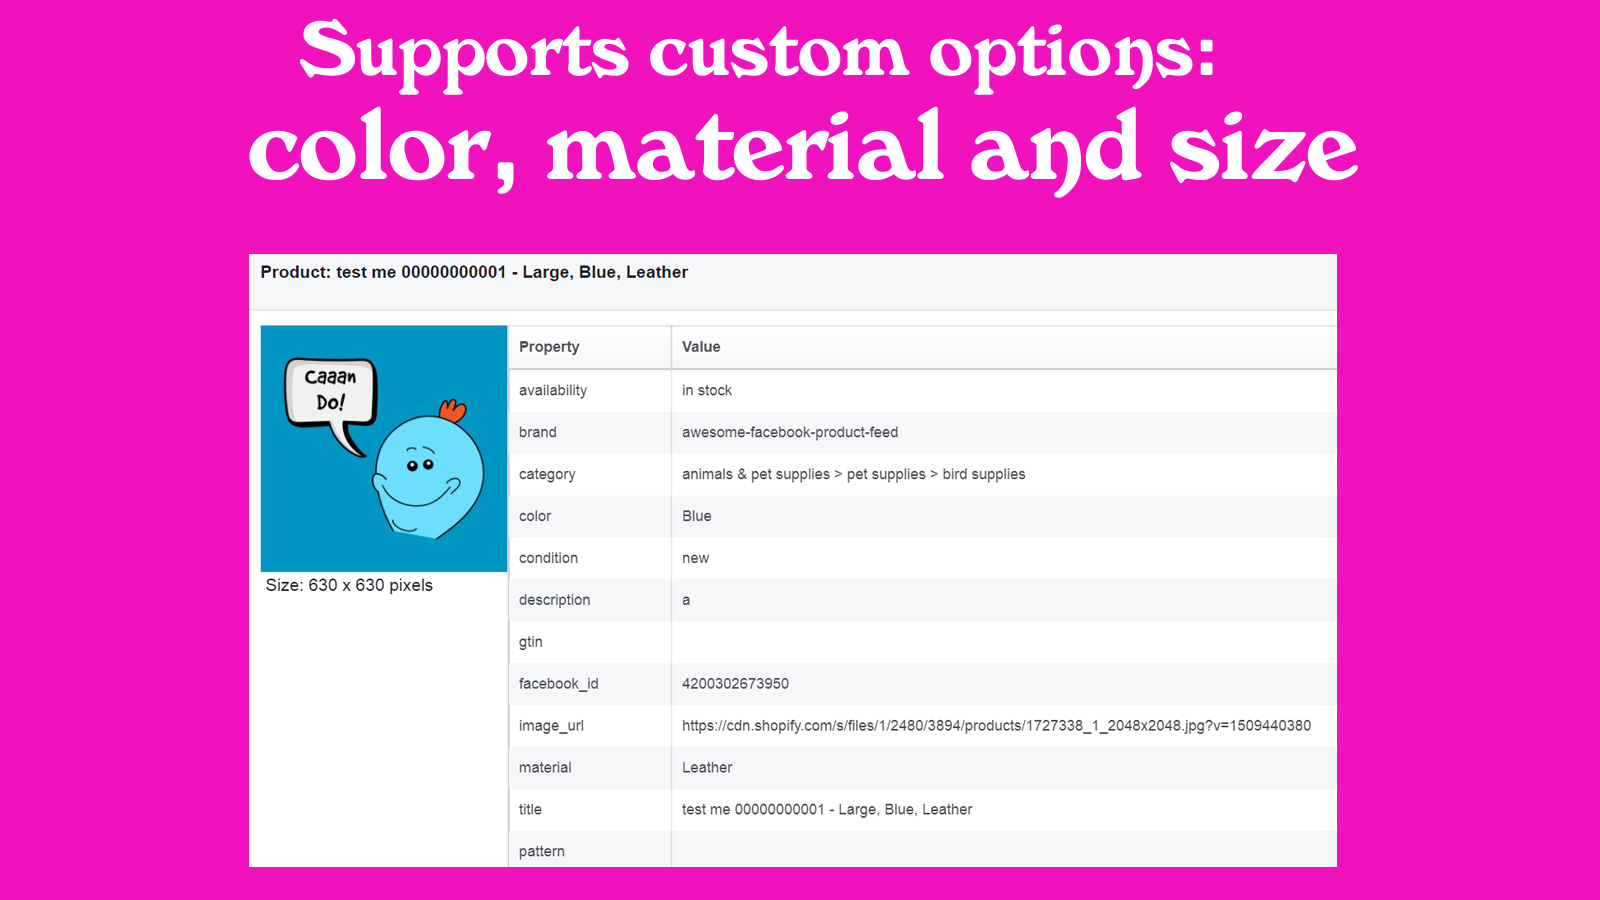 Supports custom options: color, material and size